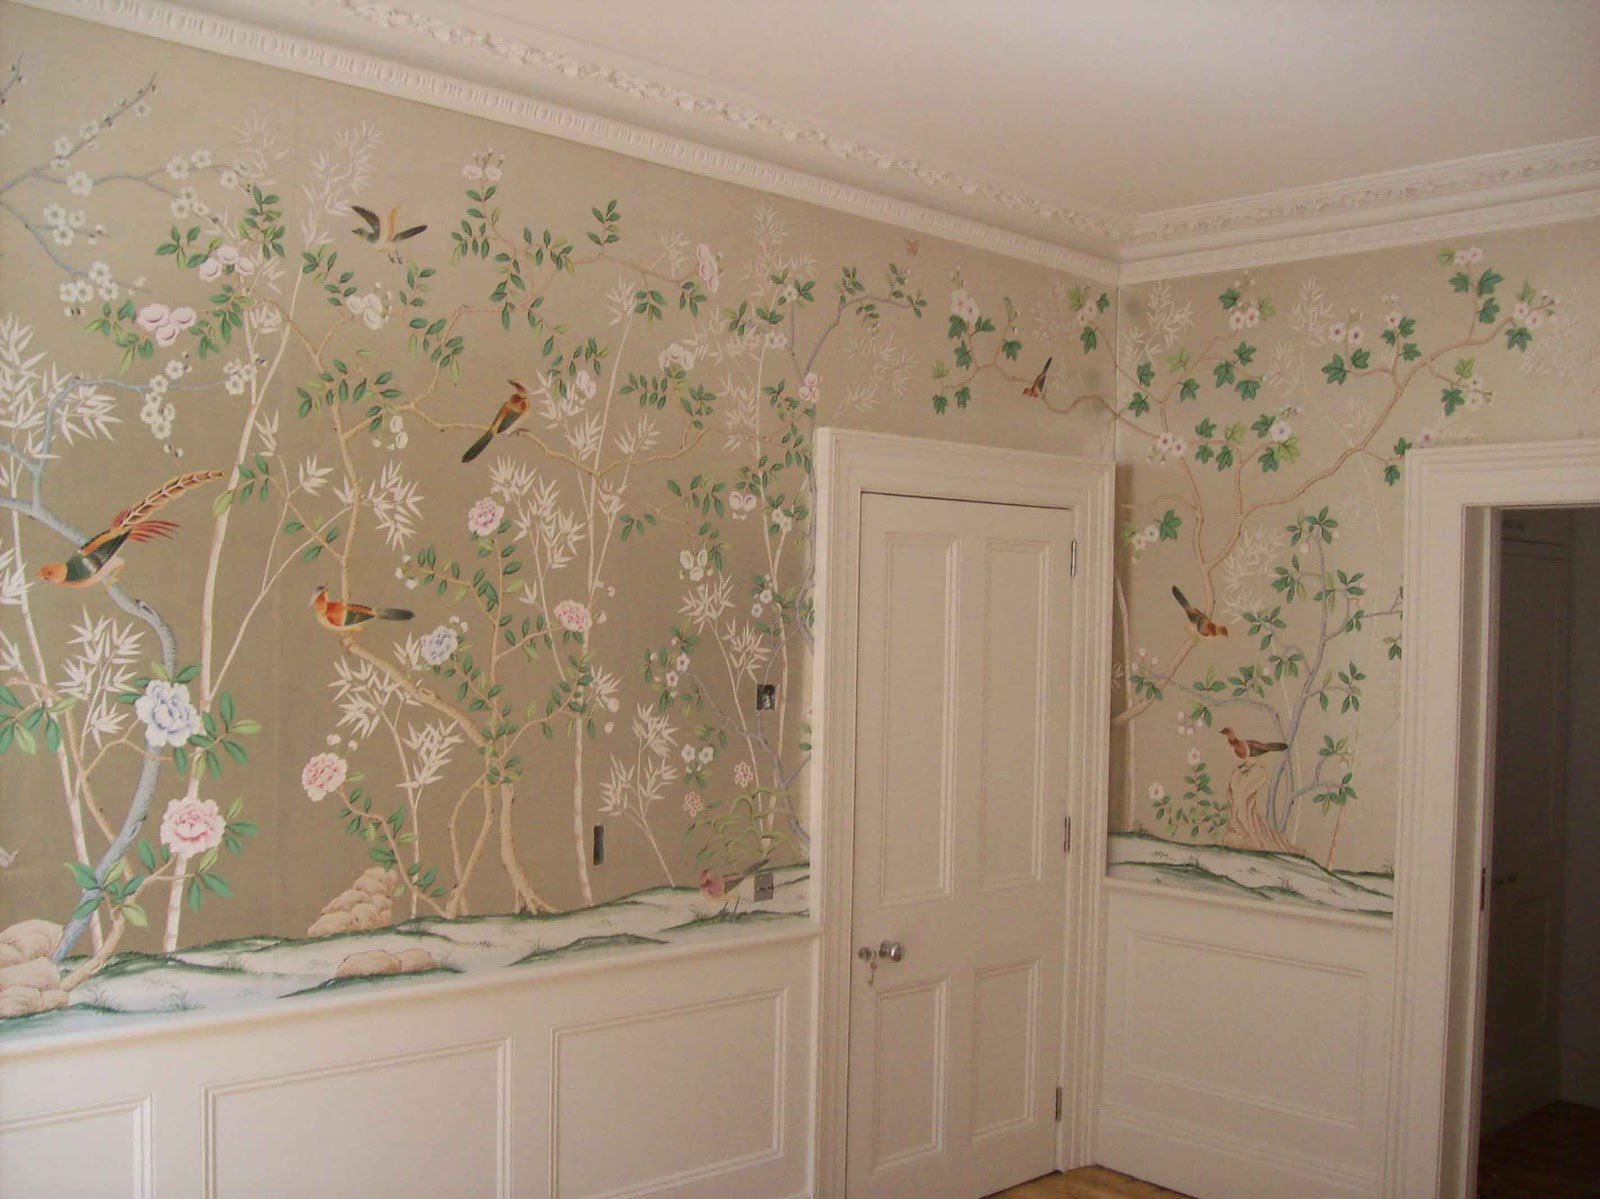  Gorgeous Green Dining Room de Gournay Wallpaper takes center stage 1600x1199